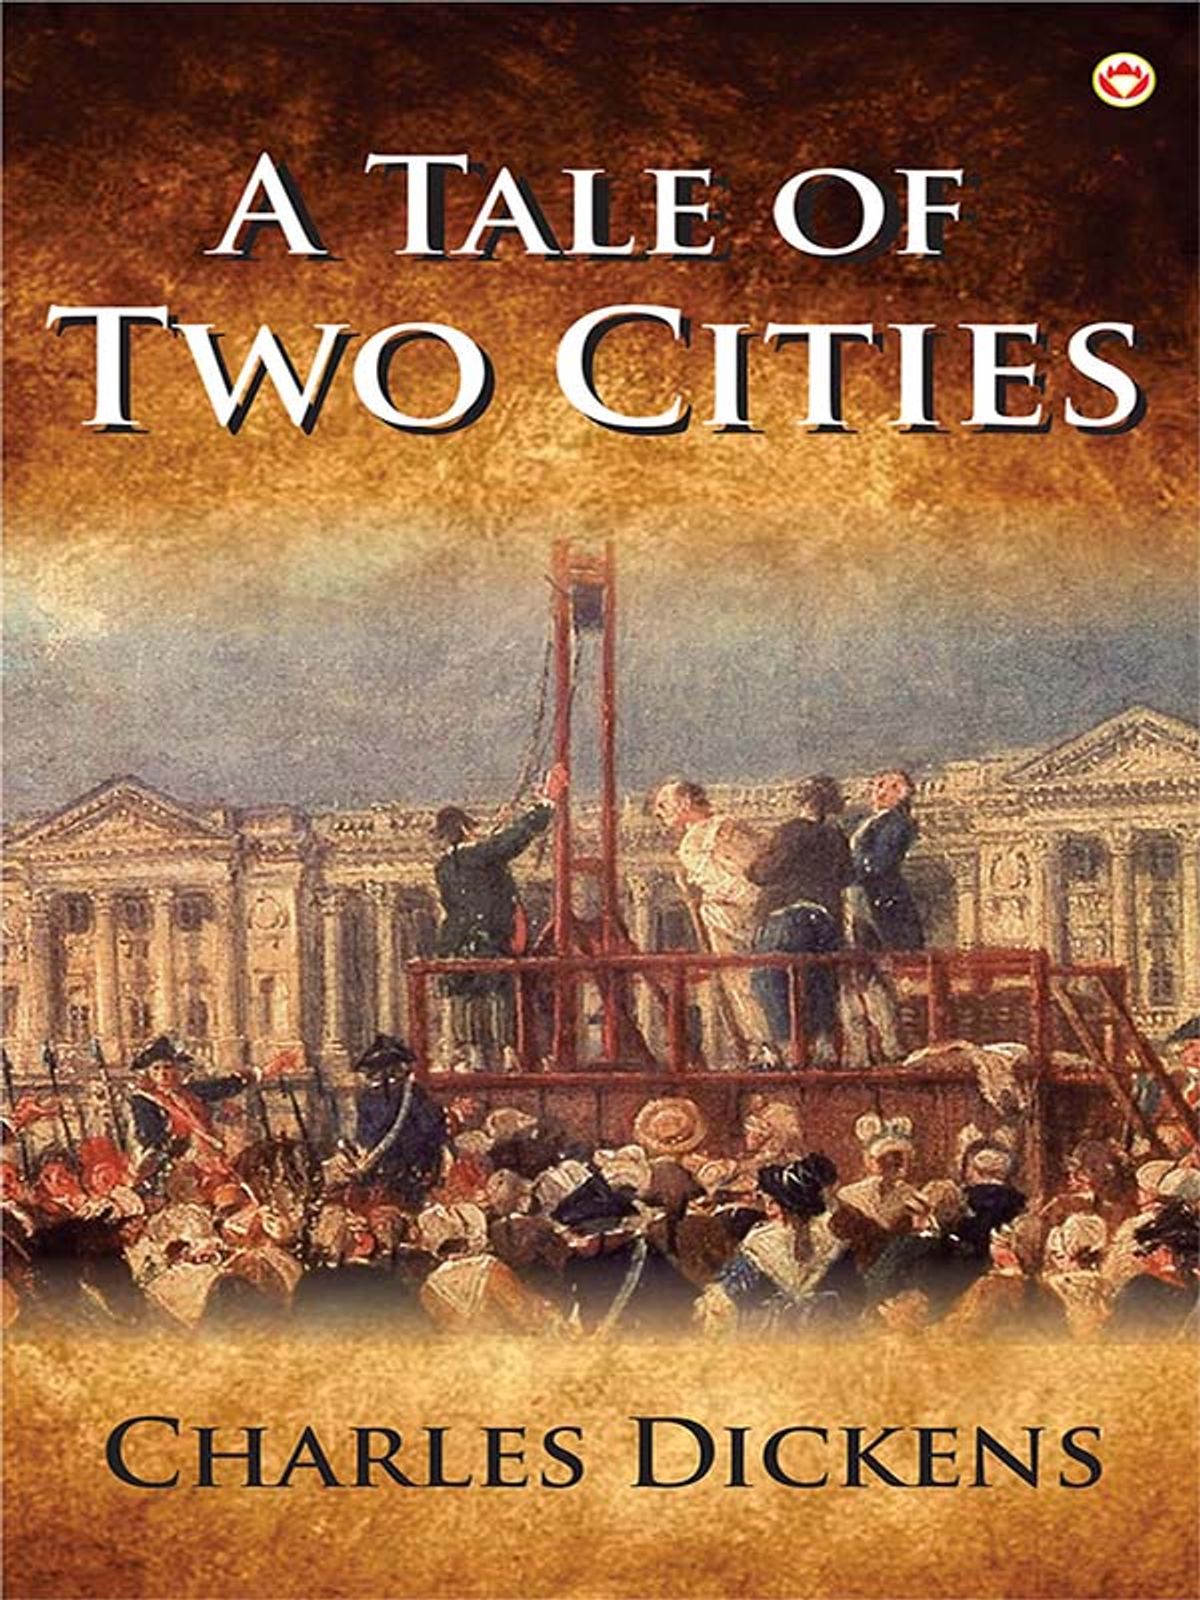 A Tale of Two Cities Book 2 Chapters 4-6 questions & answers for ...